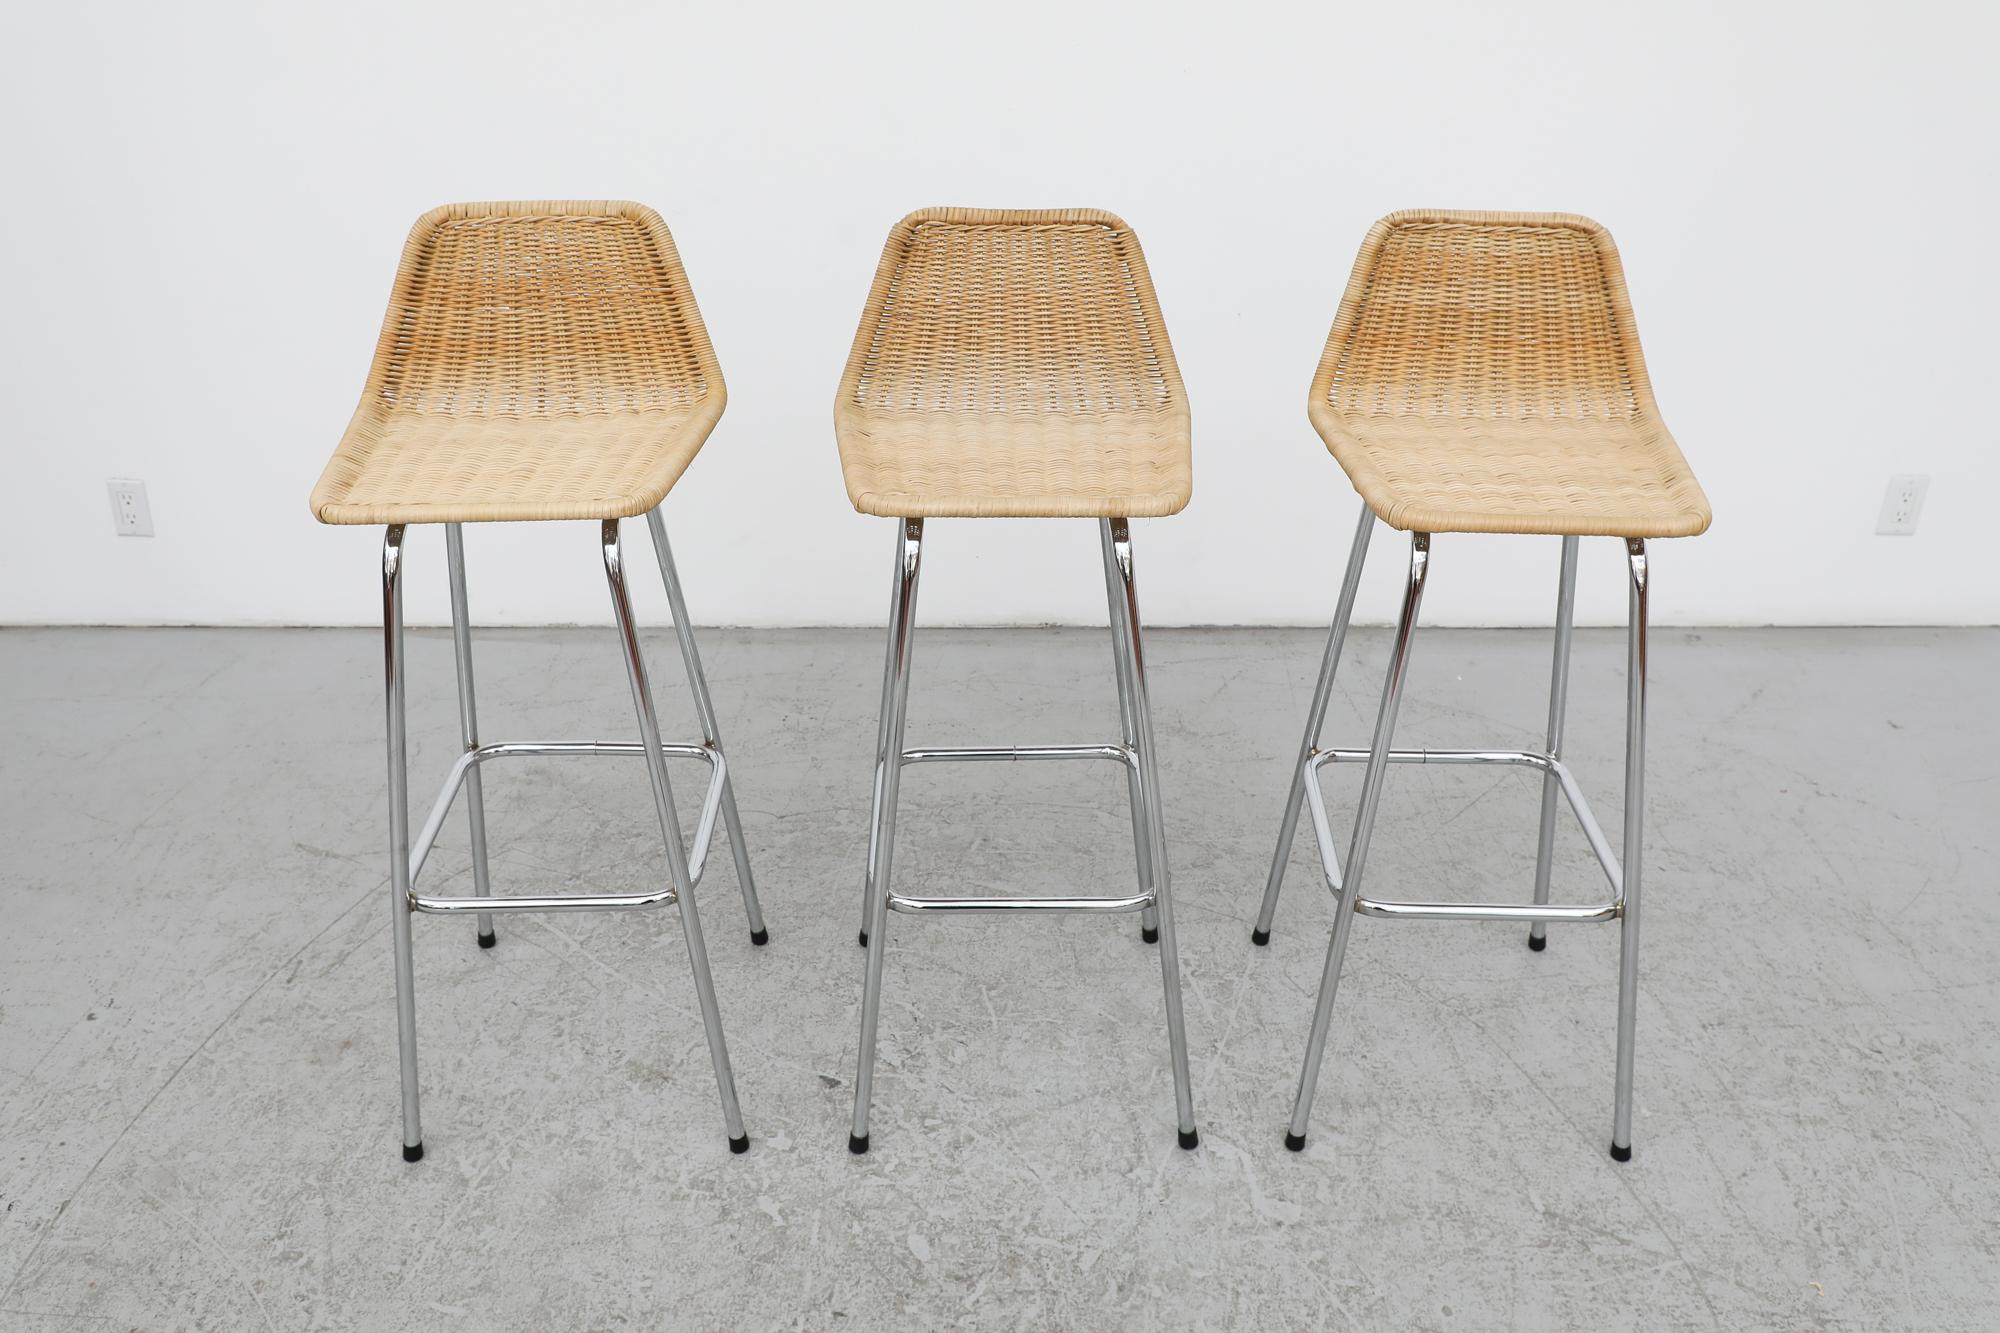 Mid-20th Century Charlotte Perriand Style Wicker Bar Stools With Angled Back